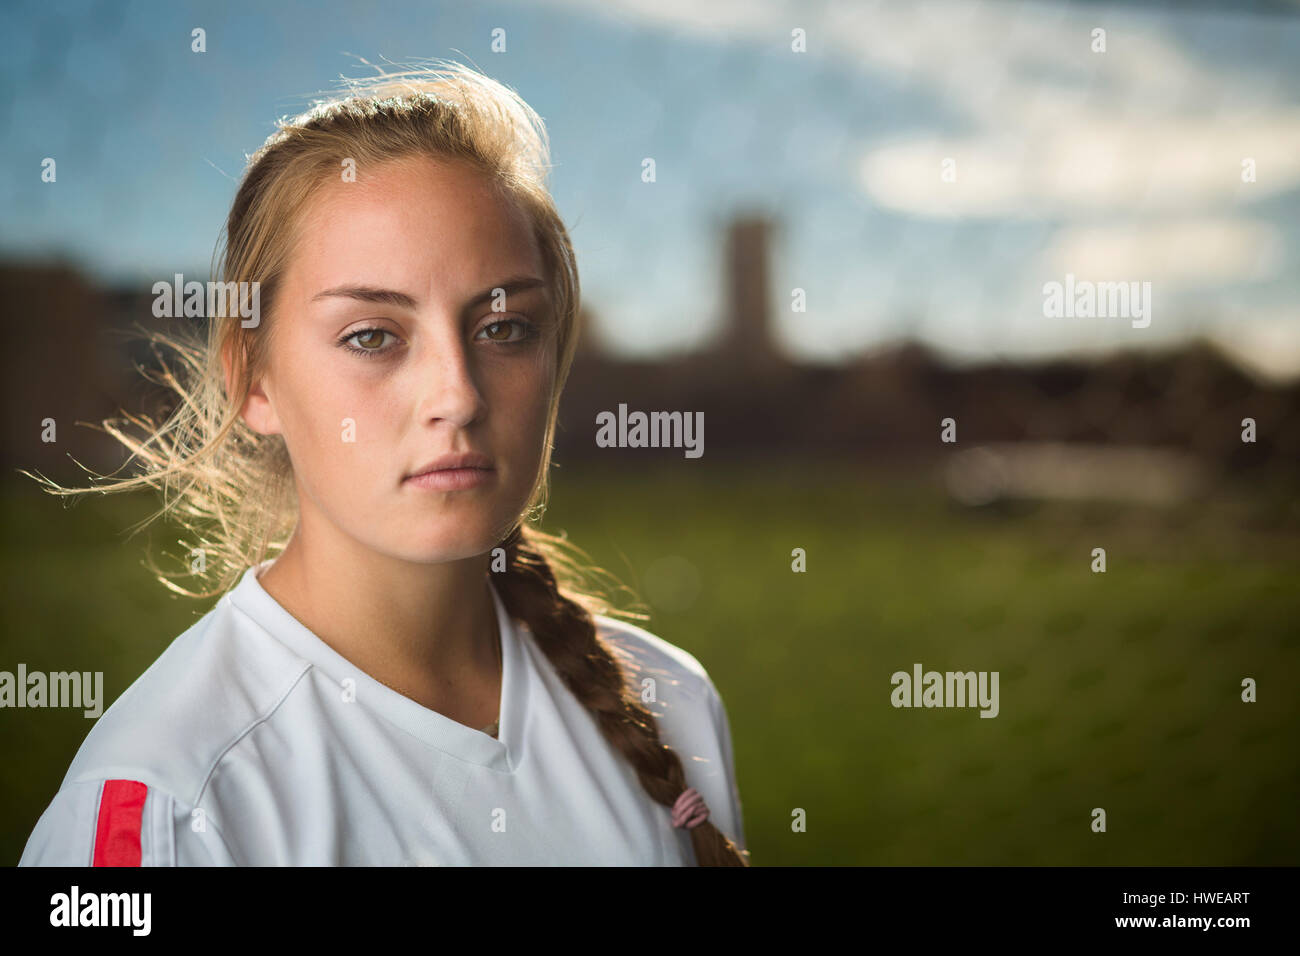 Close up portrait of serious athlete Stock Photo